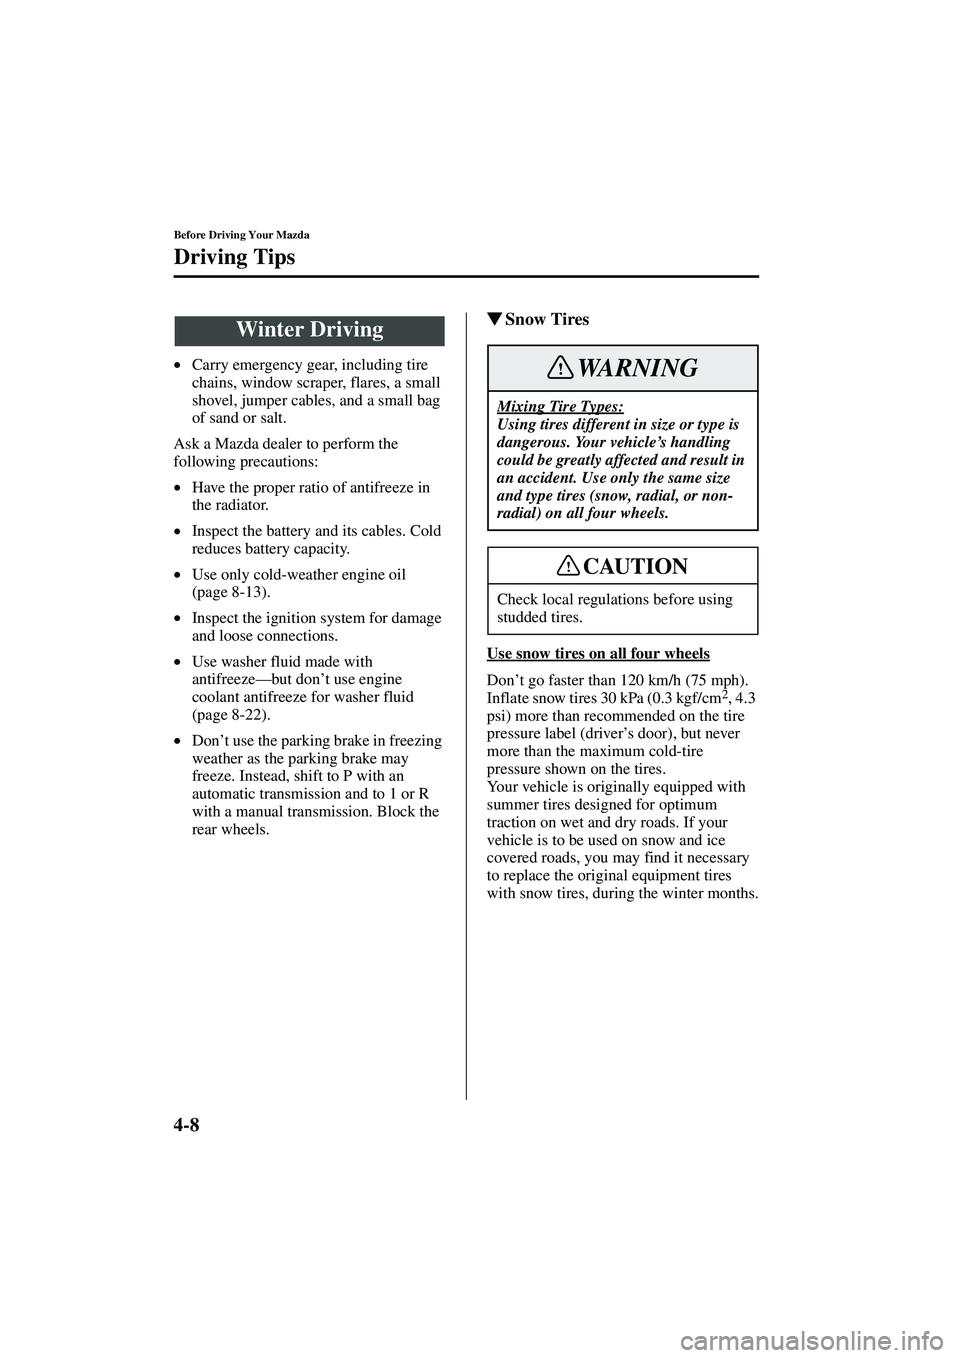 MAZDA MODEL MX-5 MIATA 2003 Manual PDF 4-8
Before Driving Your Mazda
Driving Tips
Form No. 8R09-EA-02G
•Carry emergency gear, including tire 
chains, window scraper, flares, a small 
shovel, jumper cables, and a small bag 
of sand or sal